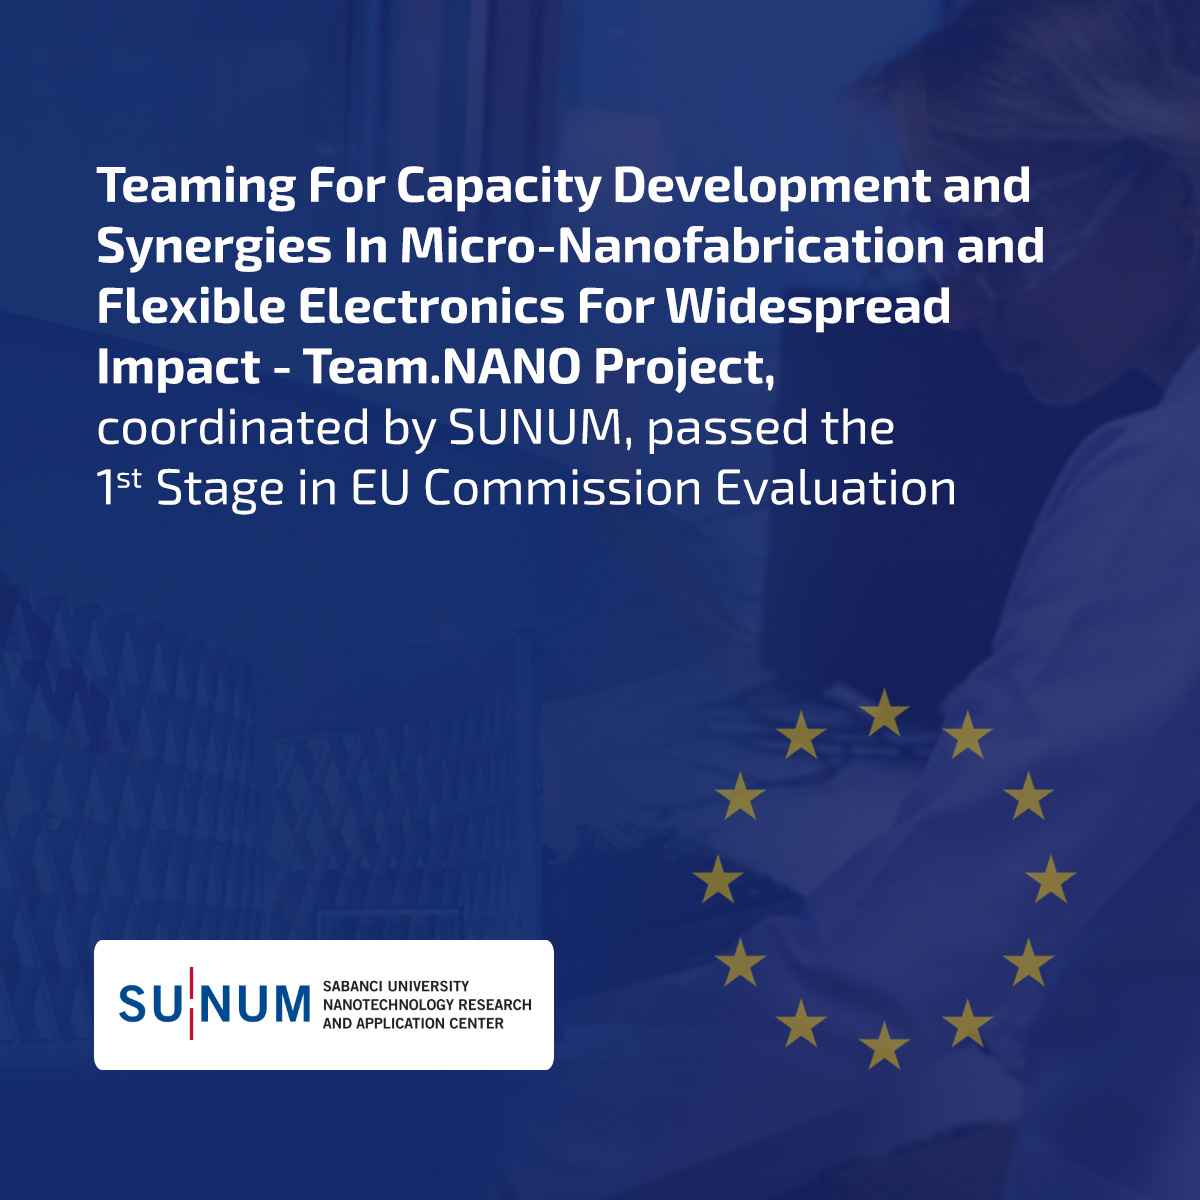 Teaming For Capacity Development And Synergies In Micro-Nanofabrication And Flexible Electronics For Widespread Impact -Team.NANO Project, coordinated by SUNUM, passed the 1st Stage in EU Commission Evaluation